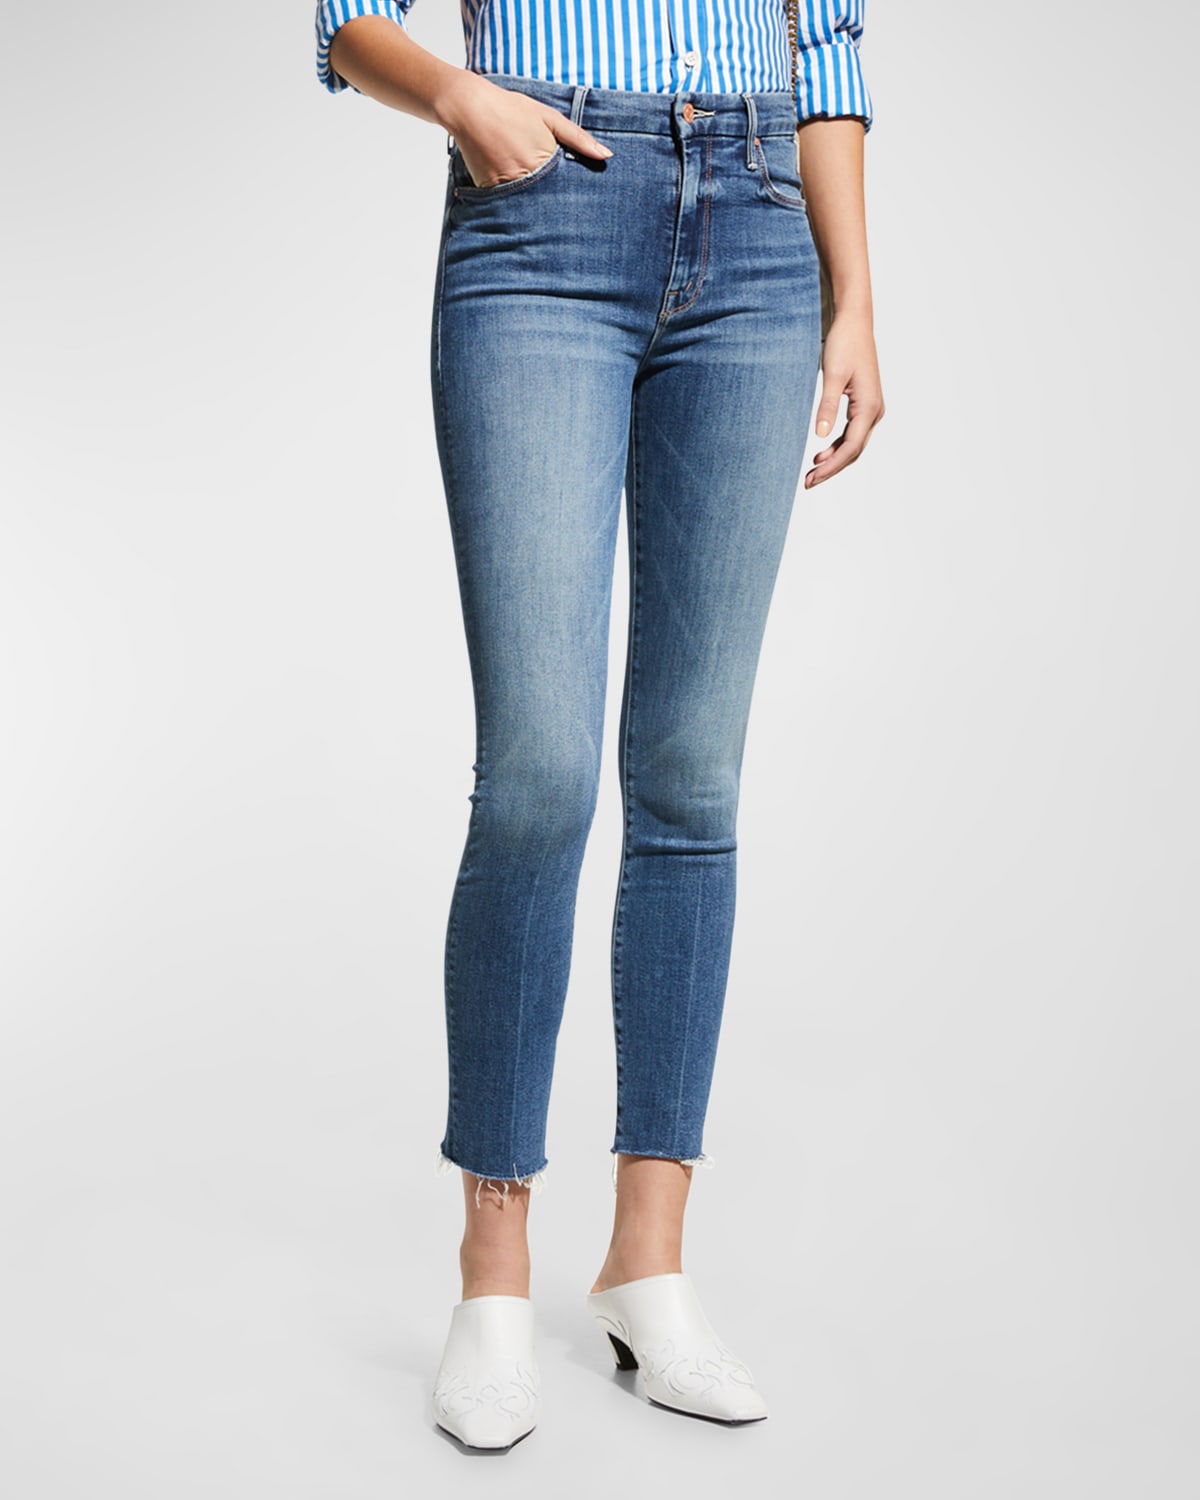 MOTHER Looker High-Waist Ankle Skinny Jeans